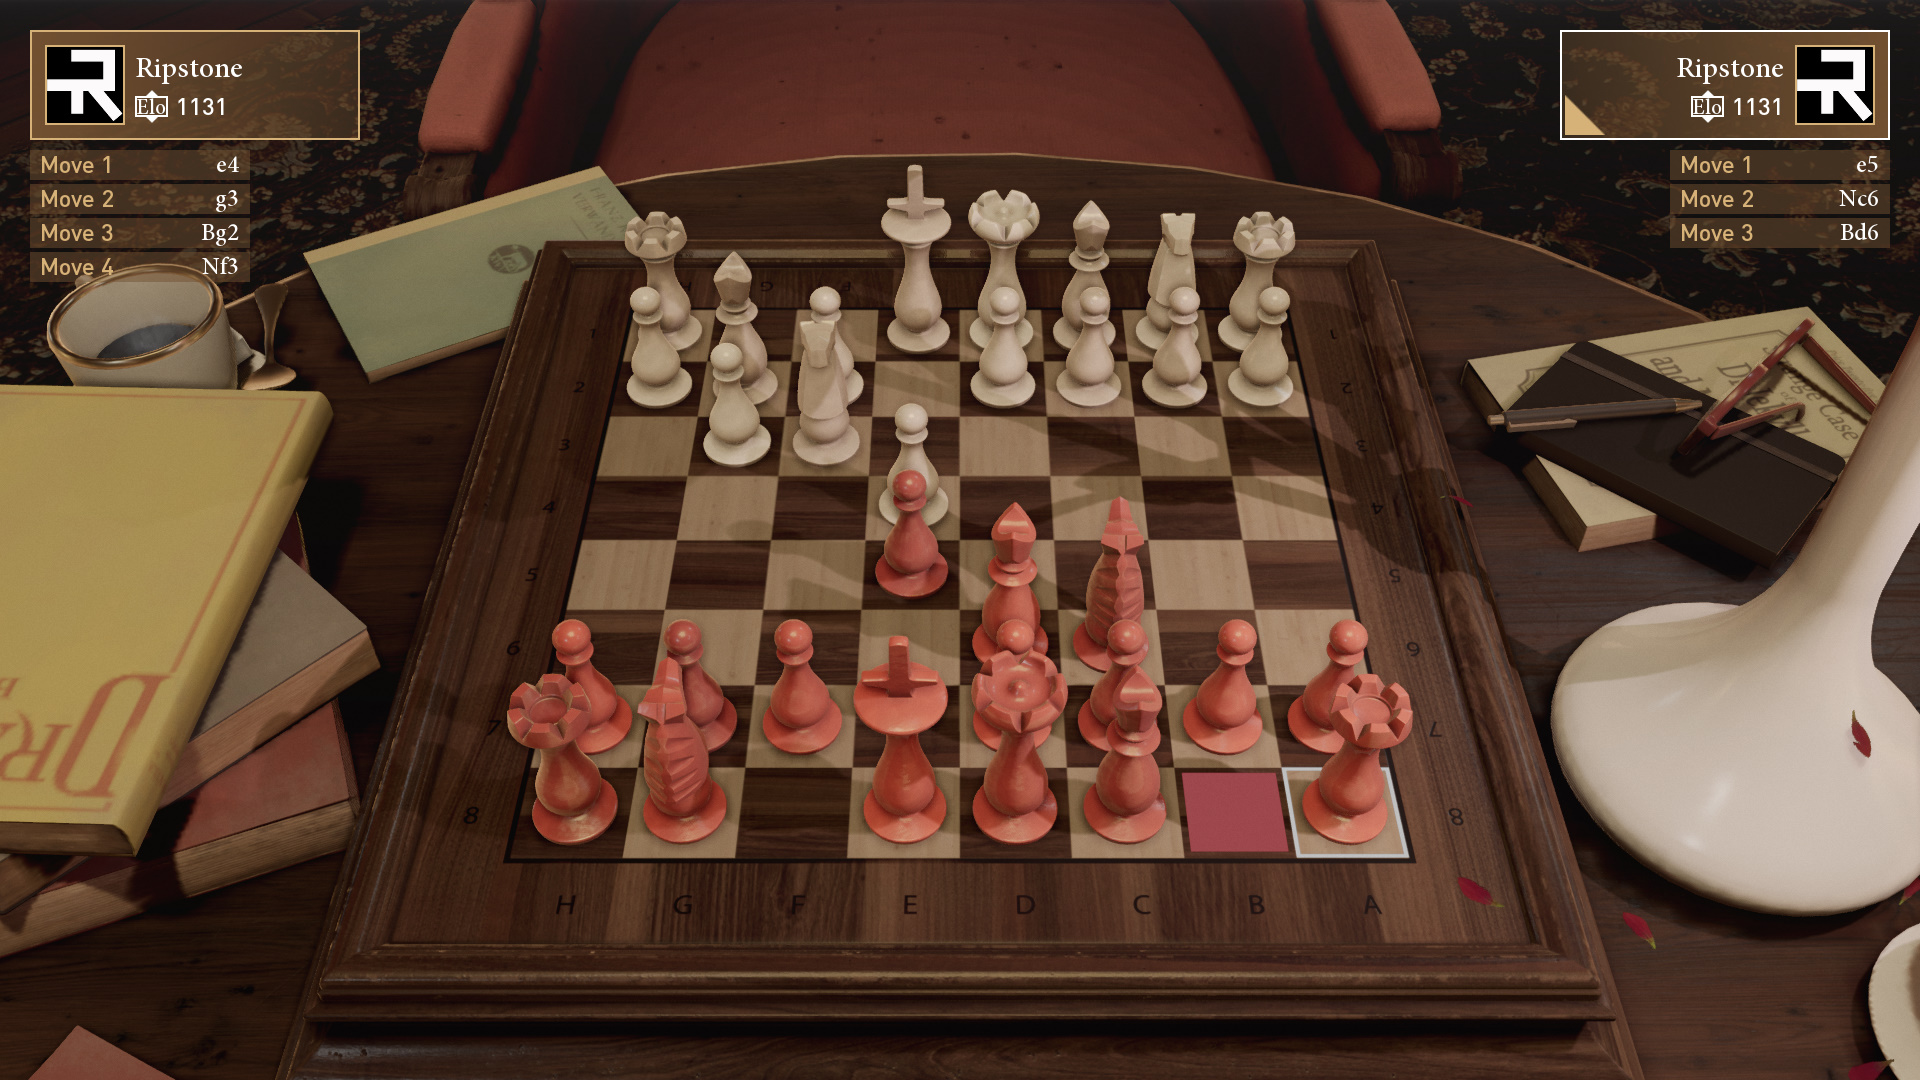 Chess Ultra release date announced for Xbox One to go alongside PS4, PC,  PSVR, Vive and Oculus versions